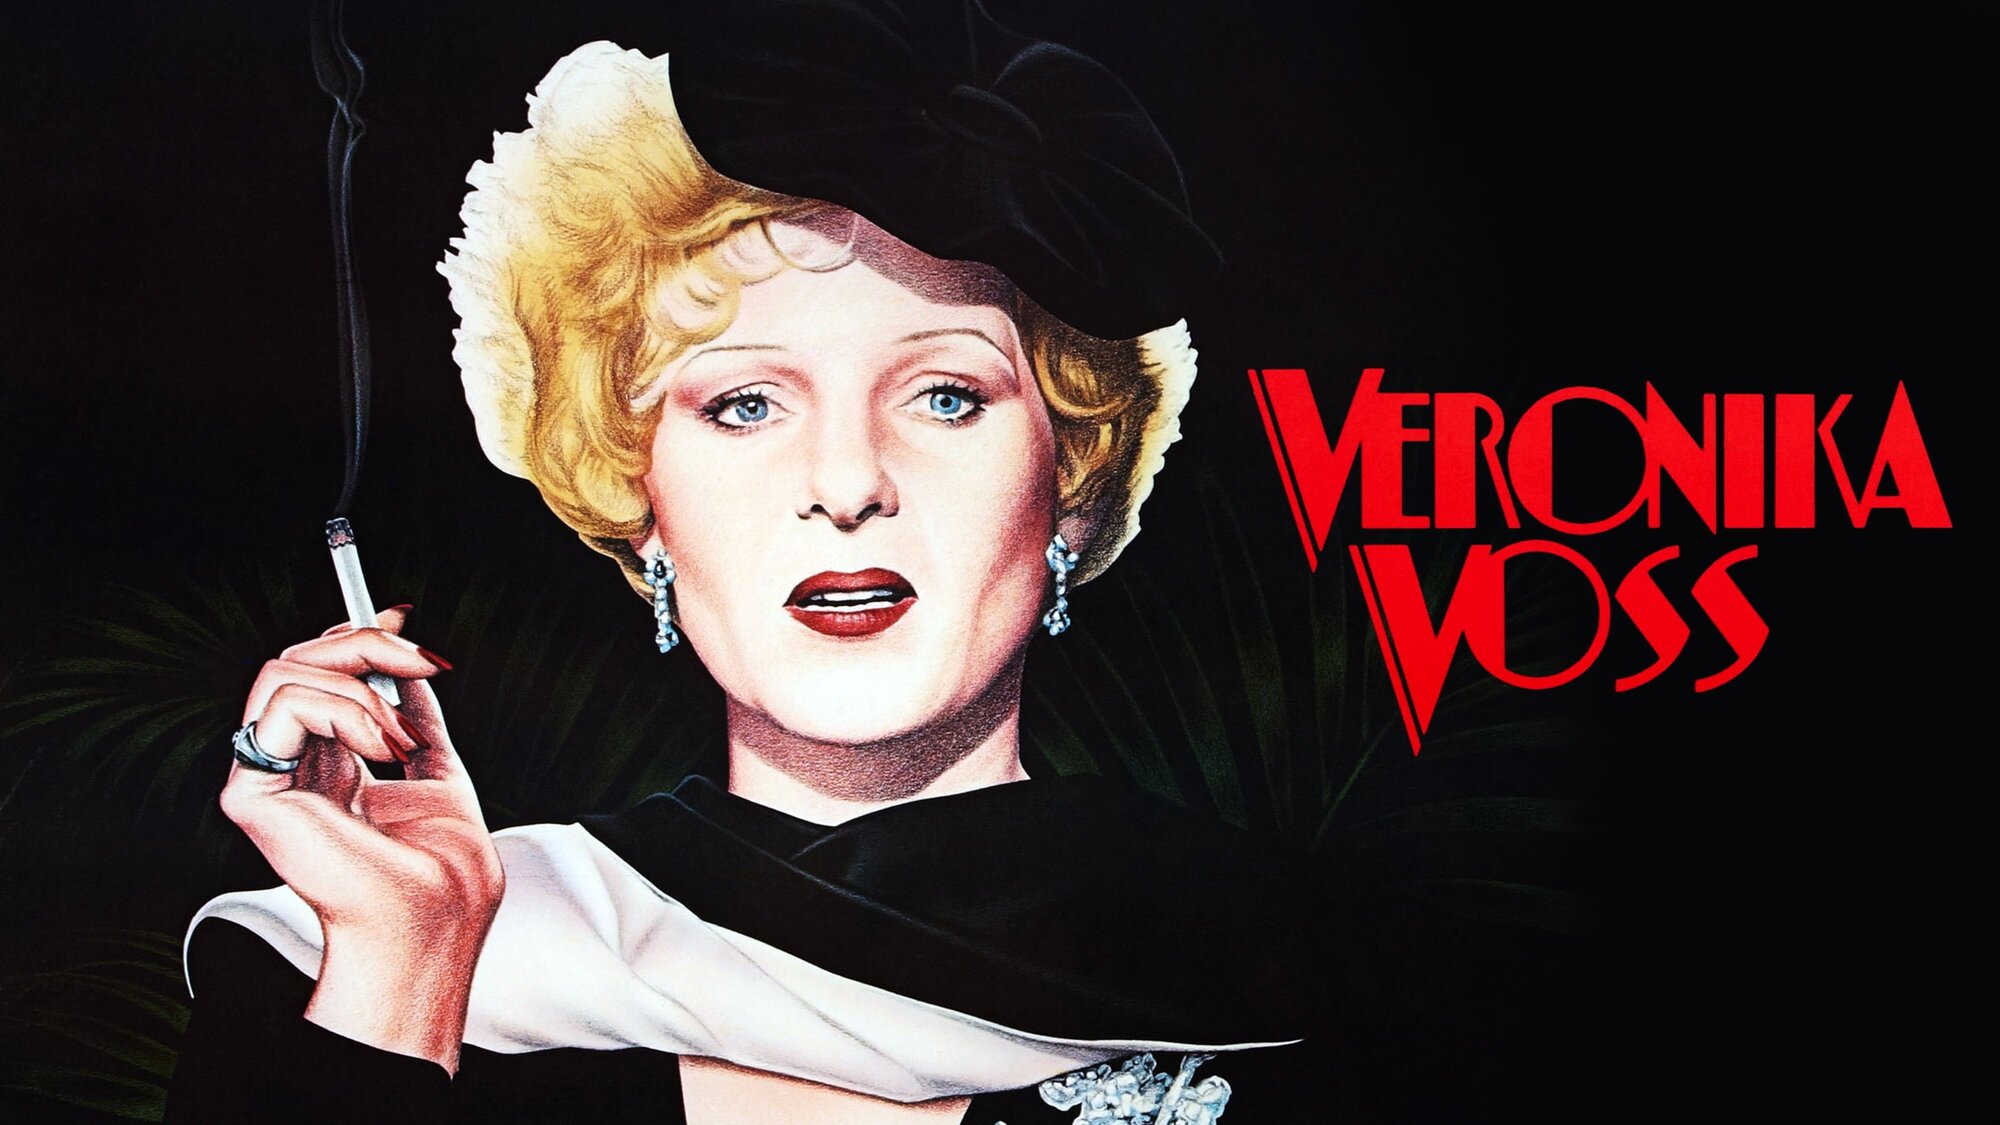 45-facts-about-the-movie-veronika-voss